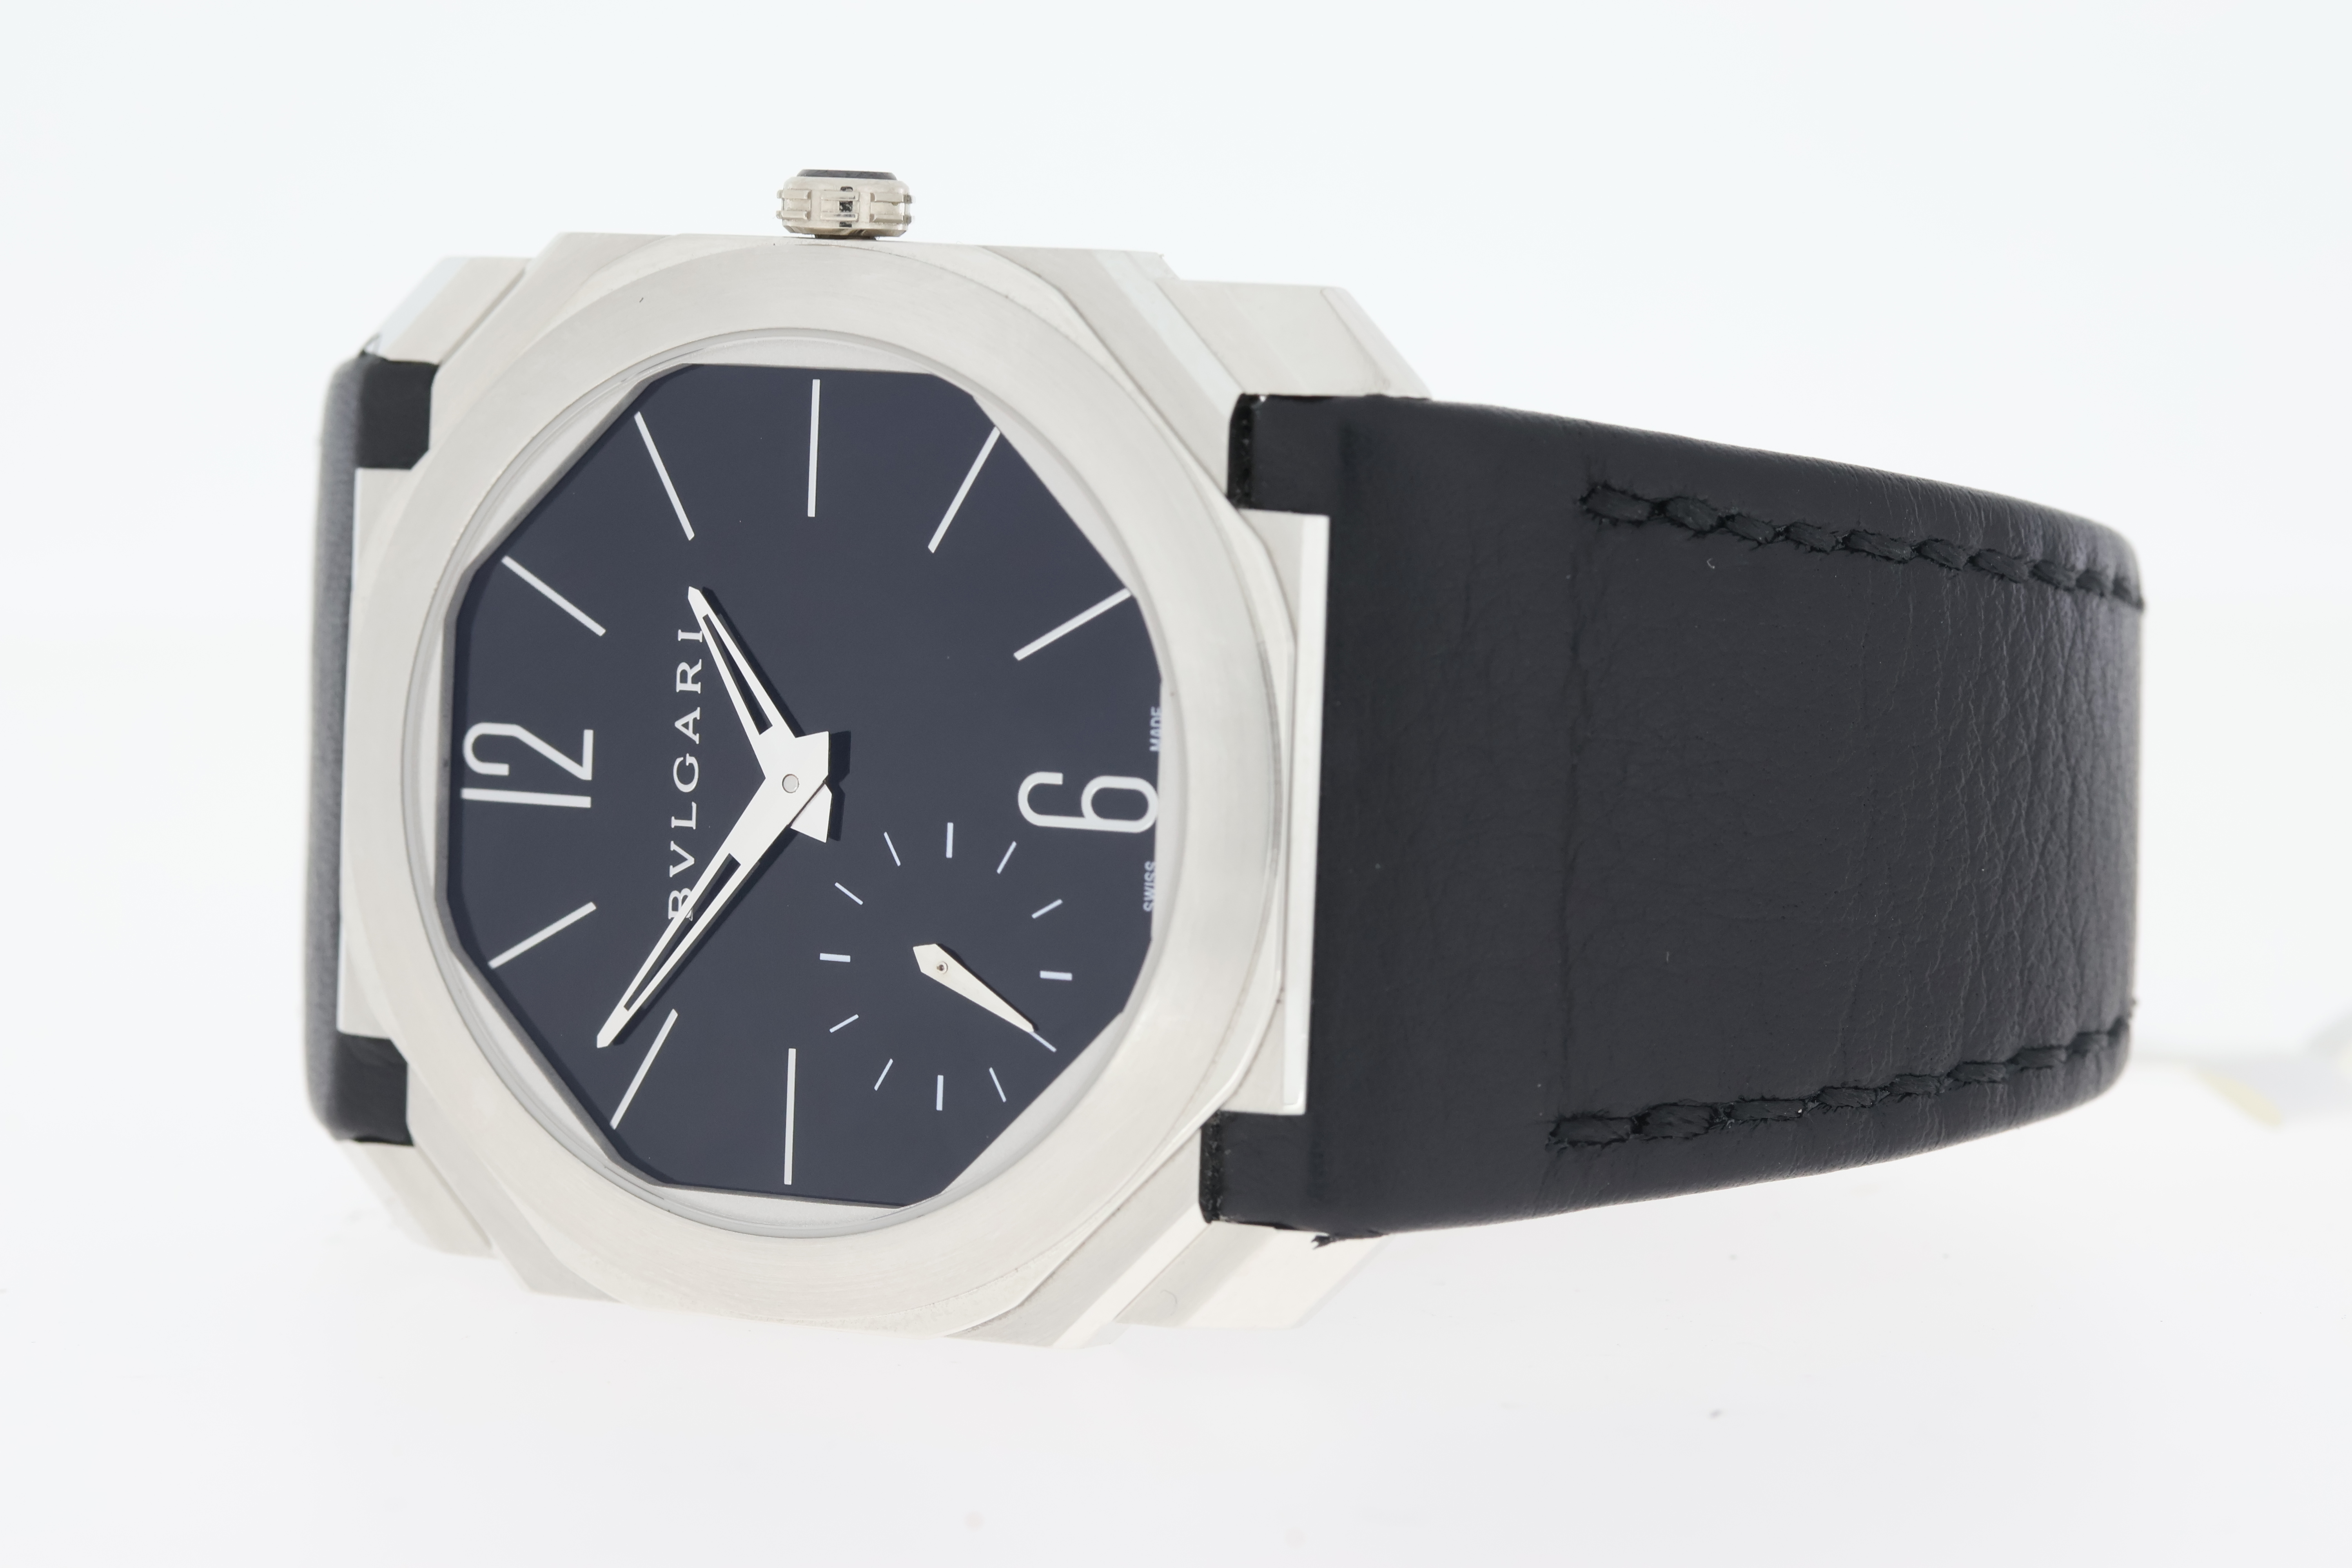 Bulgari Octo Finissimo Ultra Thin Platinum 102028 Manual Wind with Box and Papers - Image 3 of 5